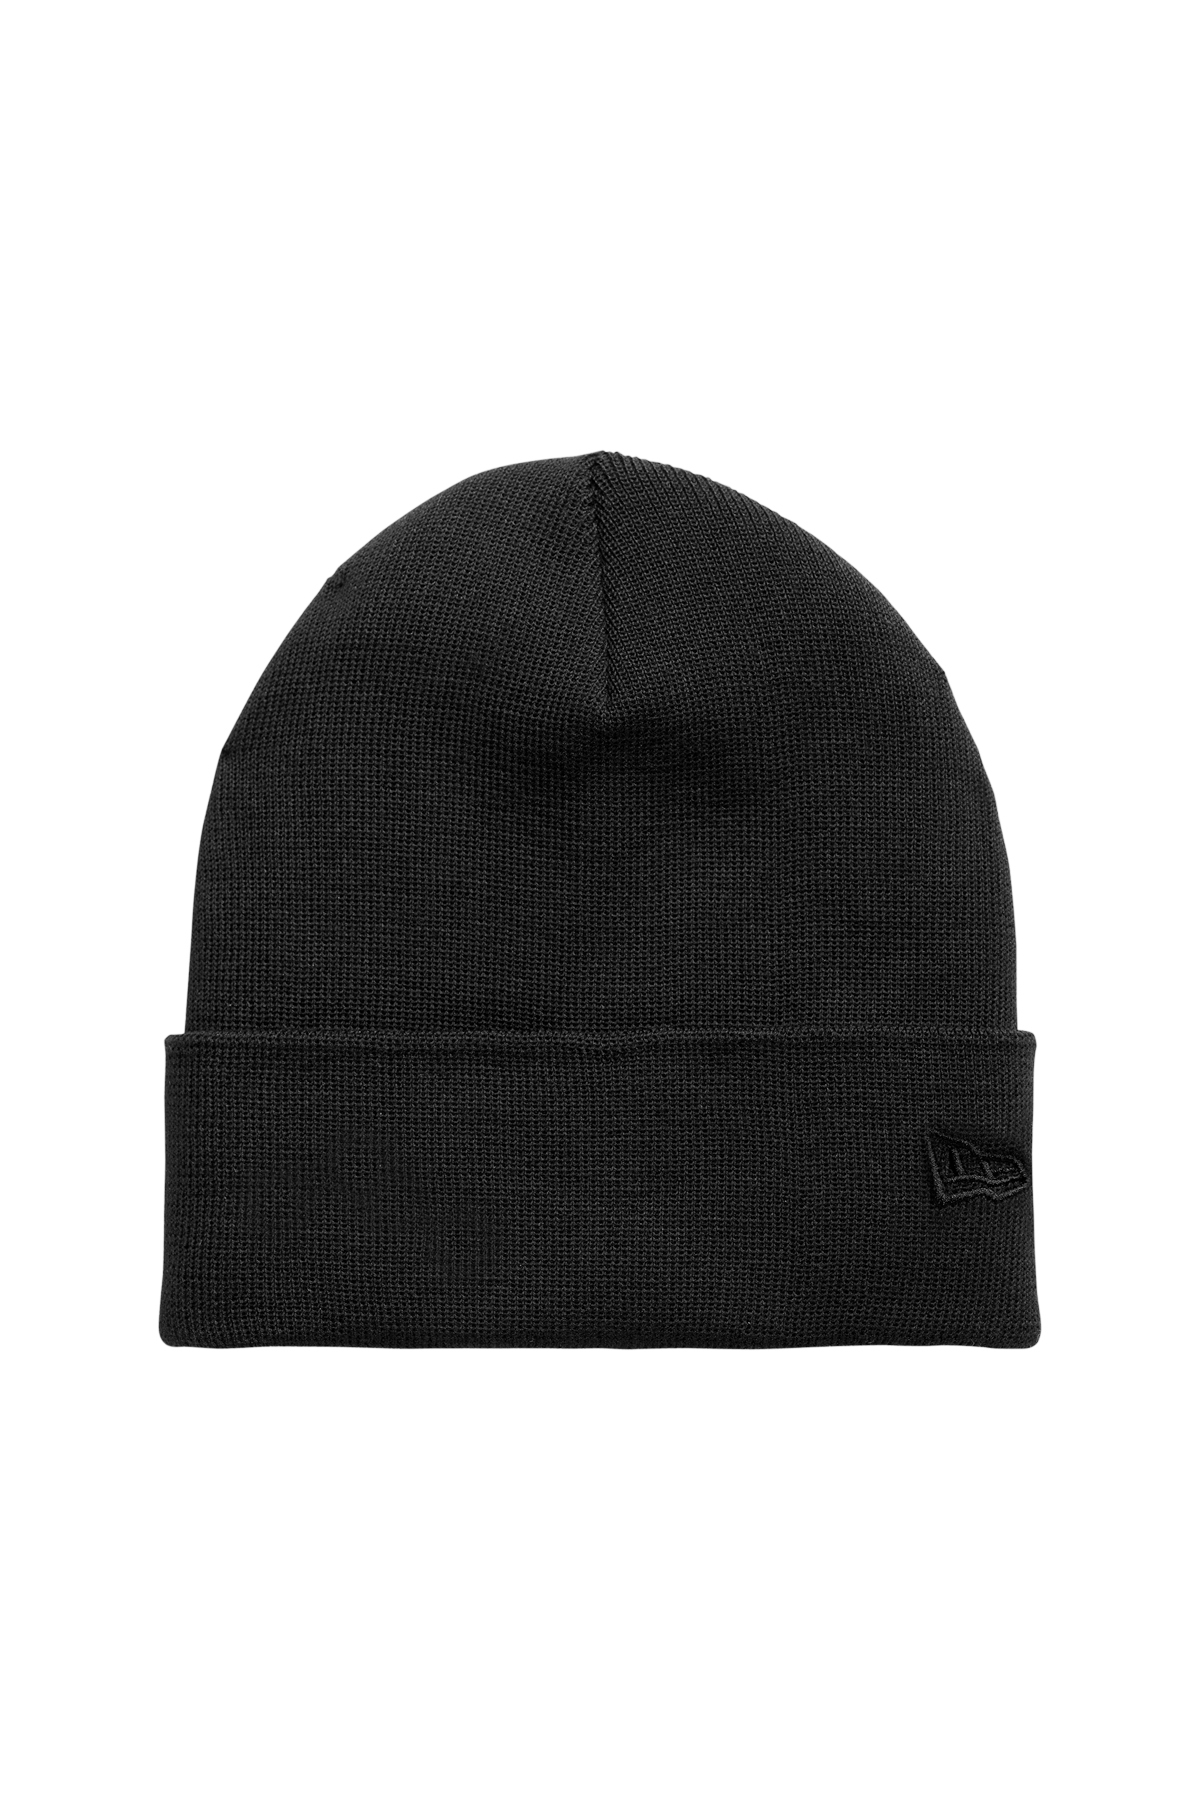 New Era Recycled Cuff Beanie | Product | Company Casuals